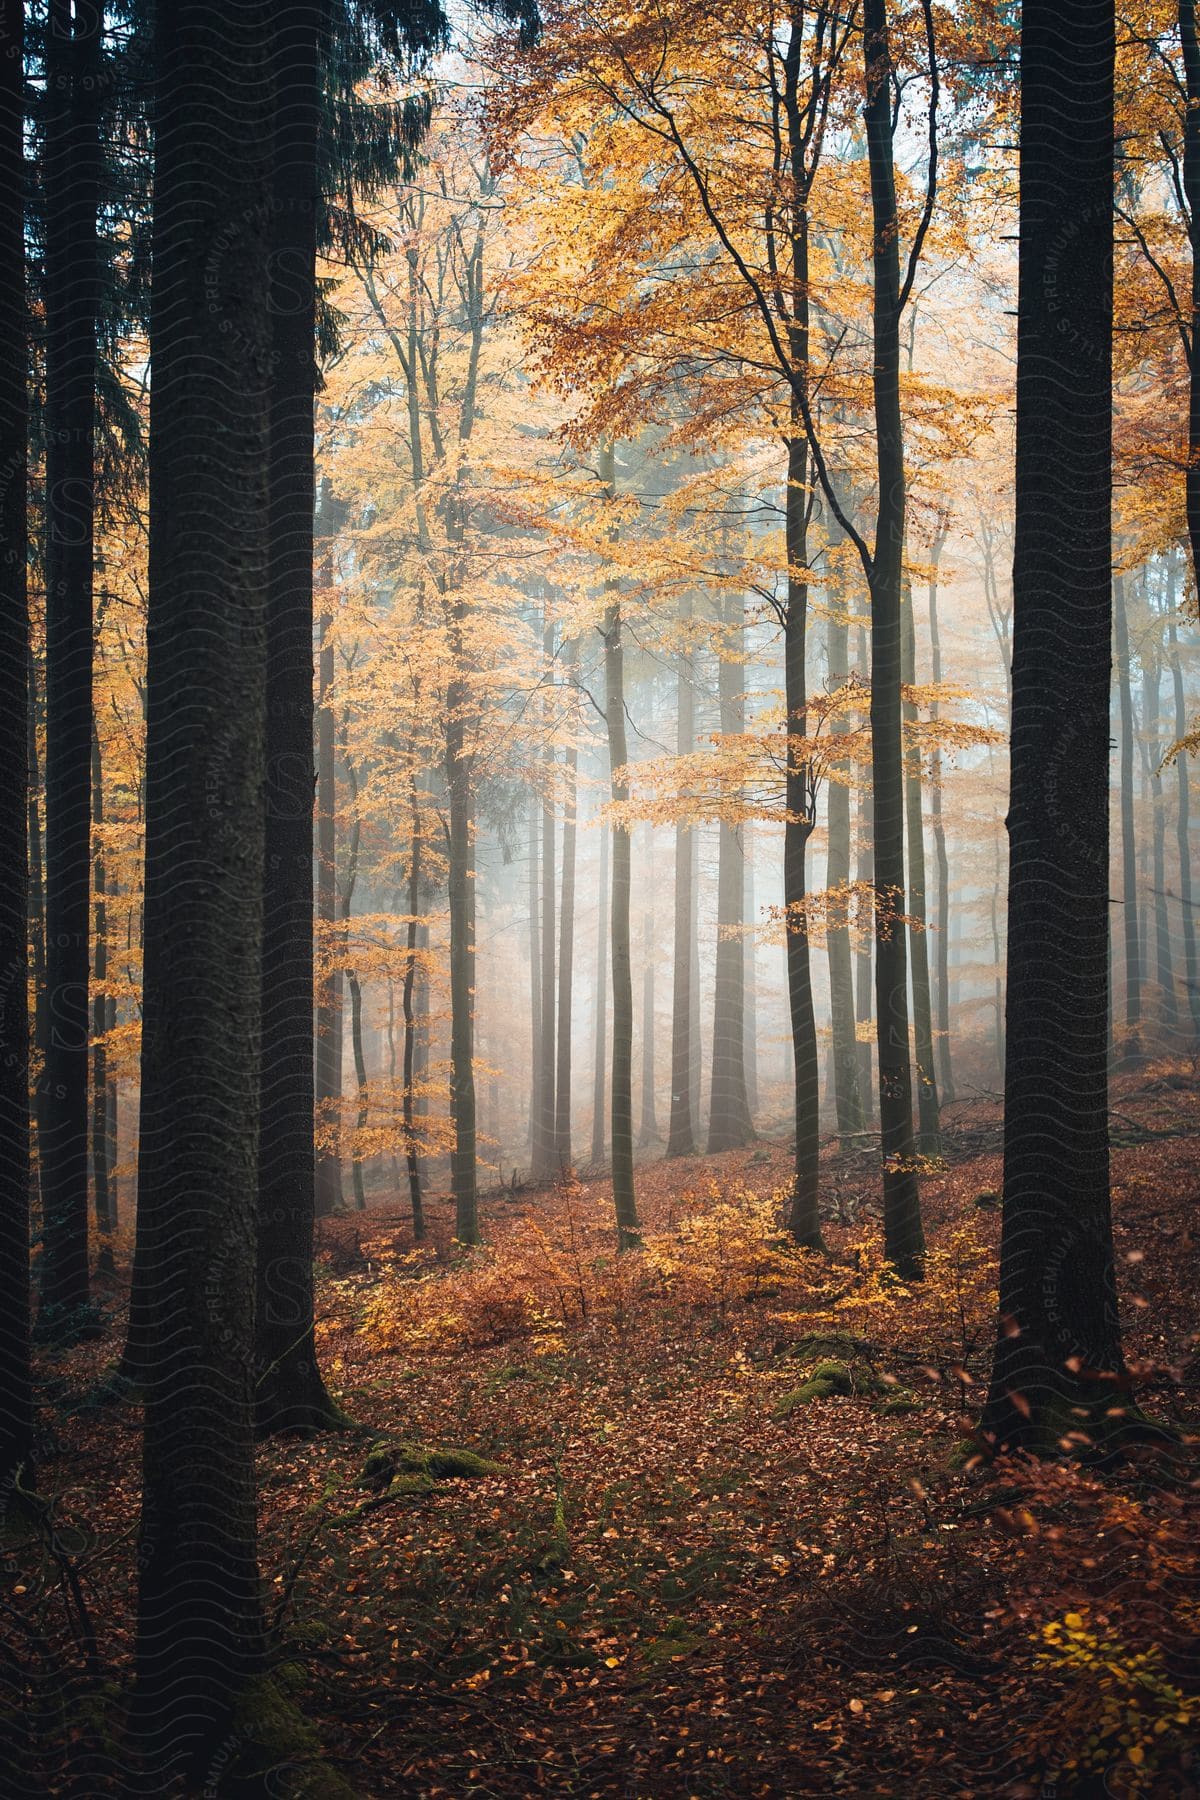 Trees in a forest captured during the fall season in germanys enchanted forests